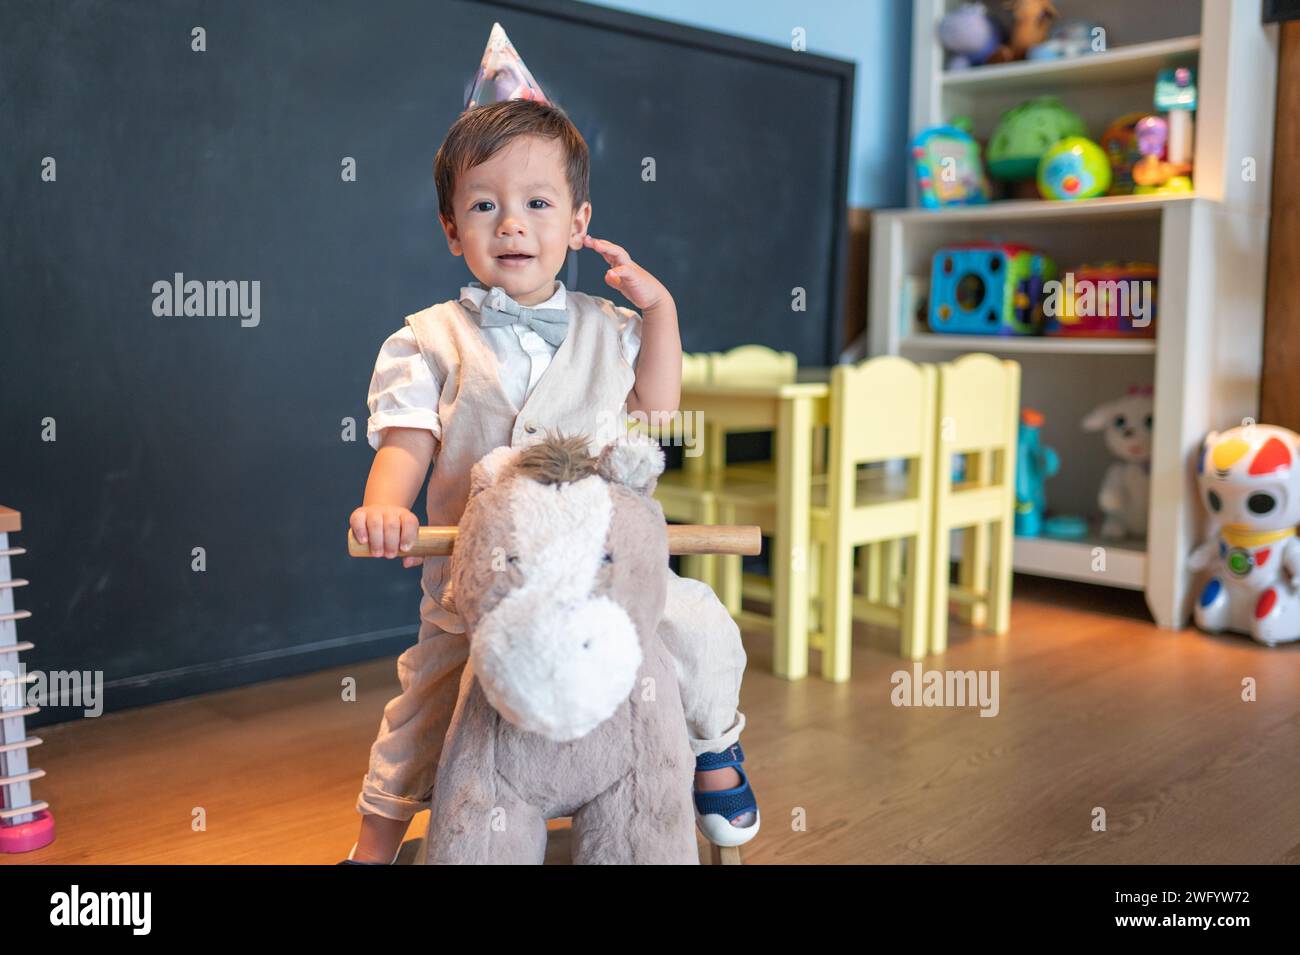 Cute one year old multiracial baby boy celebrating his first birthday in kindergarten. He is riding a toy wooden horse and smiling sweetly Stock Photo